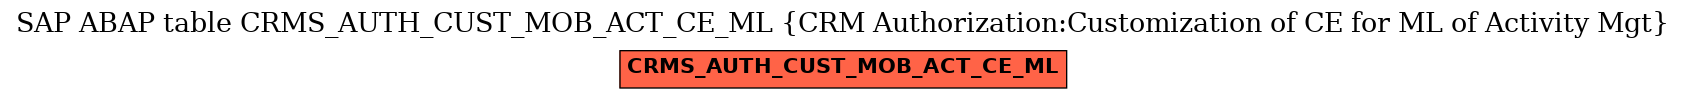 E-R Diagram for table CRMS_AUTH_CUST_MOB_ACT_CE_ML (CRM Authorization:Customization of CE for ML of Activity Mgt)